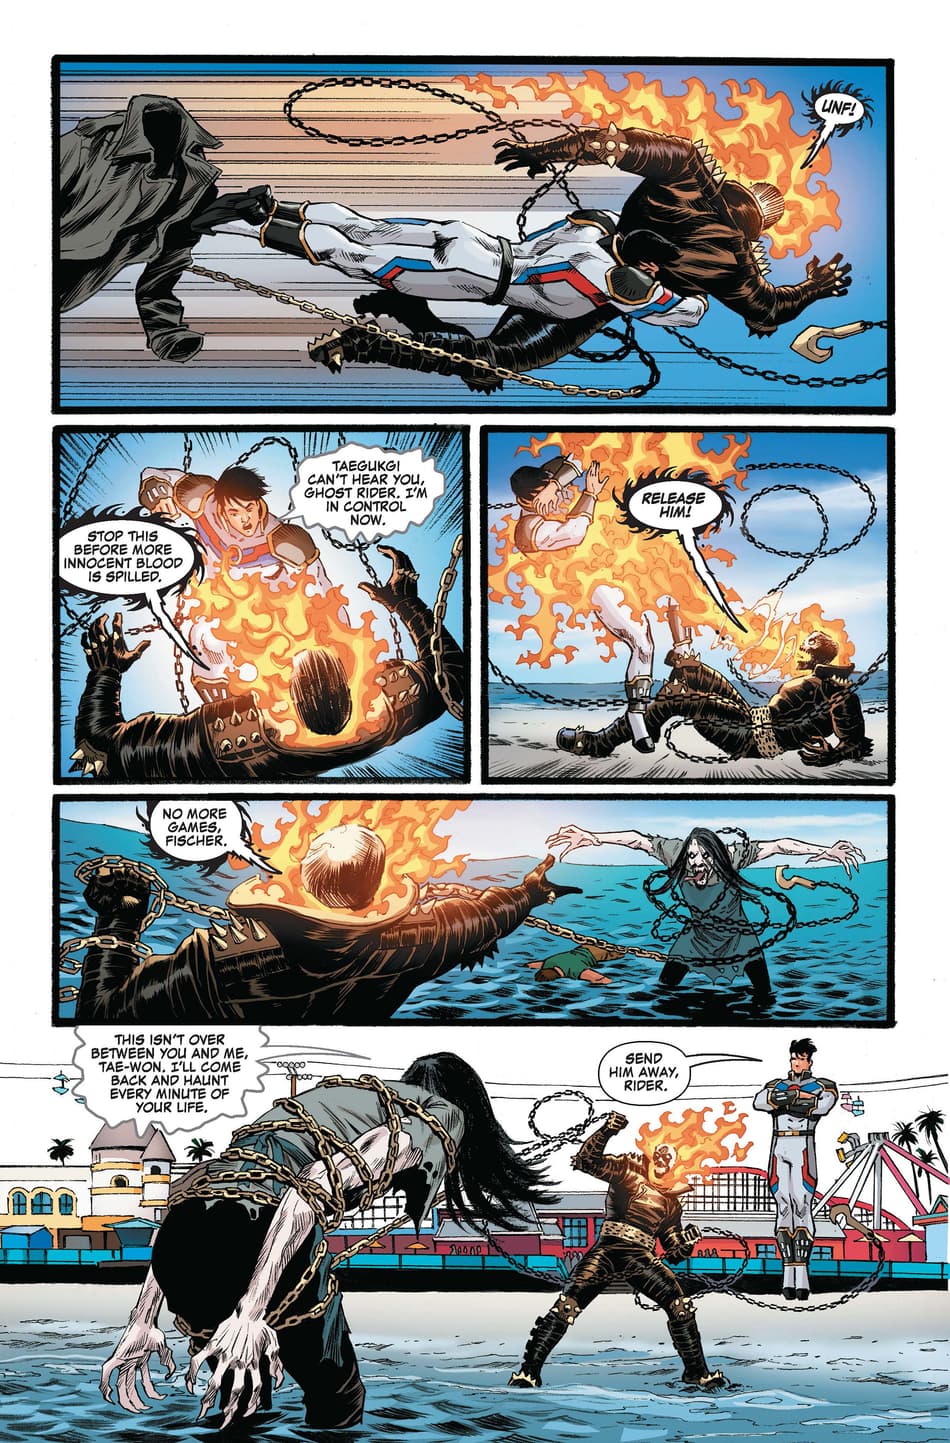 Preview page from GHOST RIDER (2022) #14.